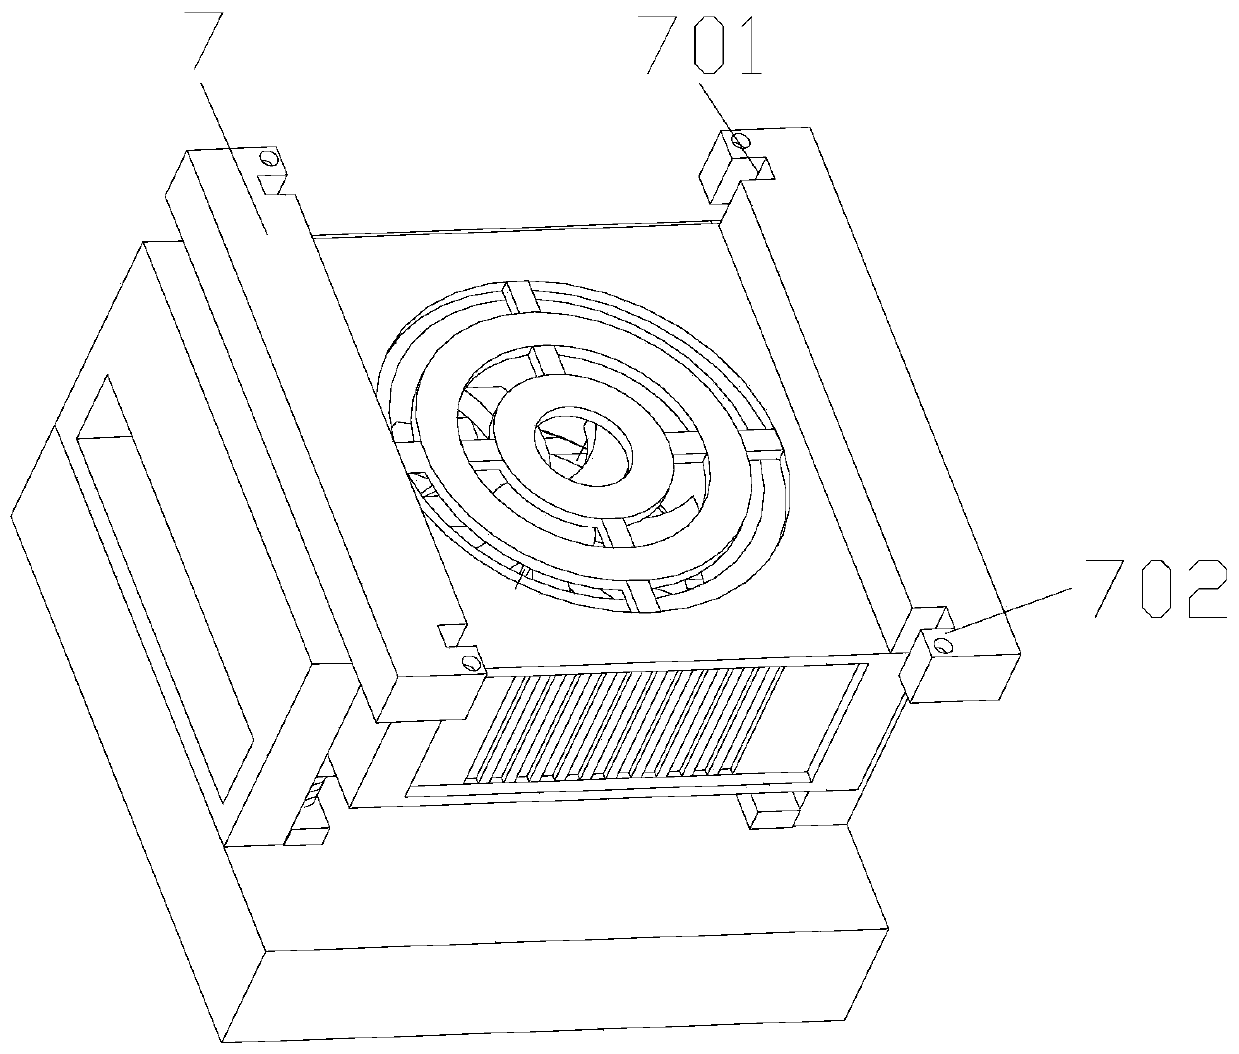 Supporting base of power device box